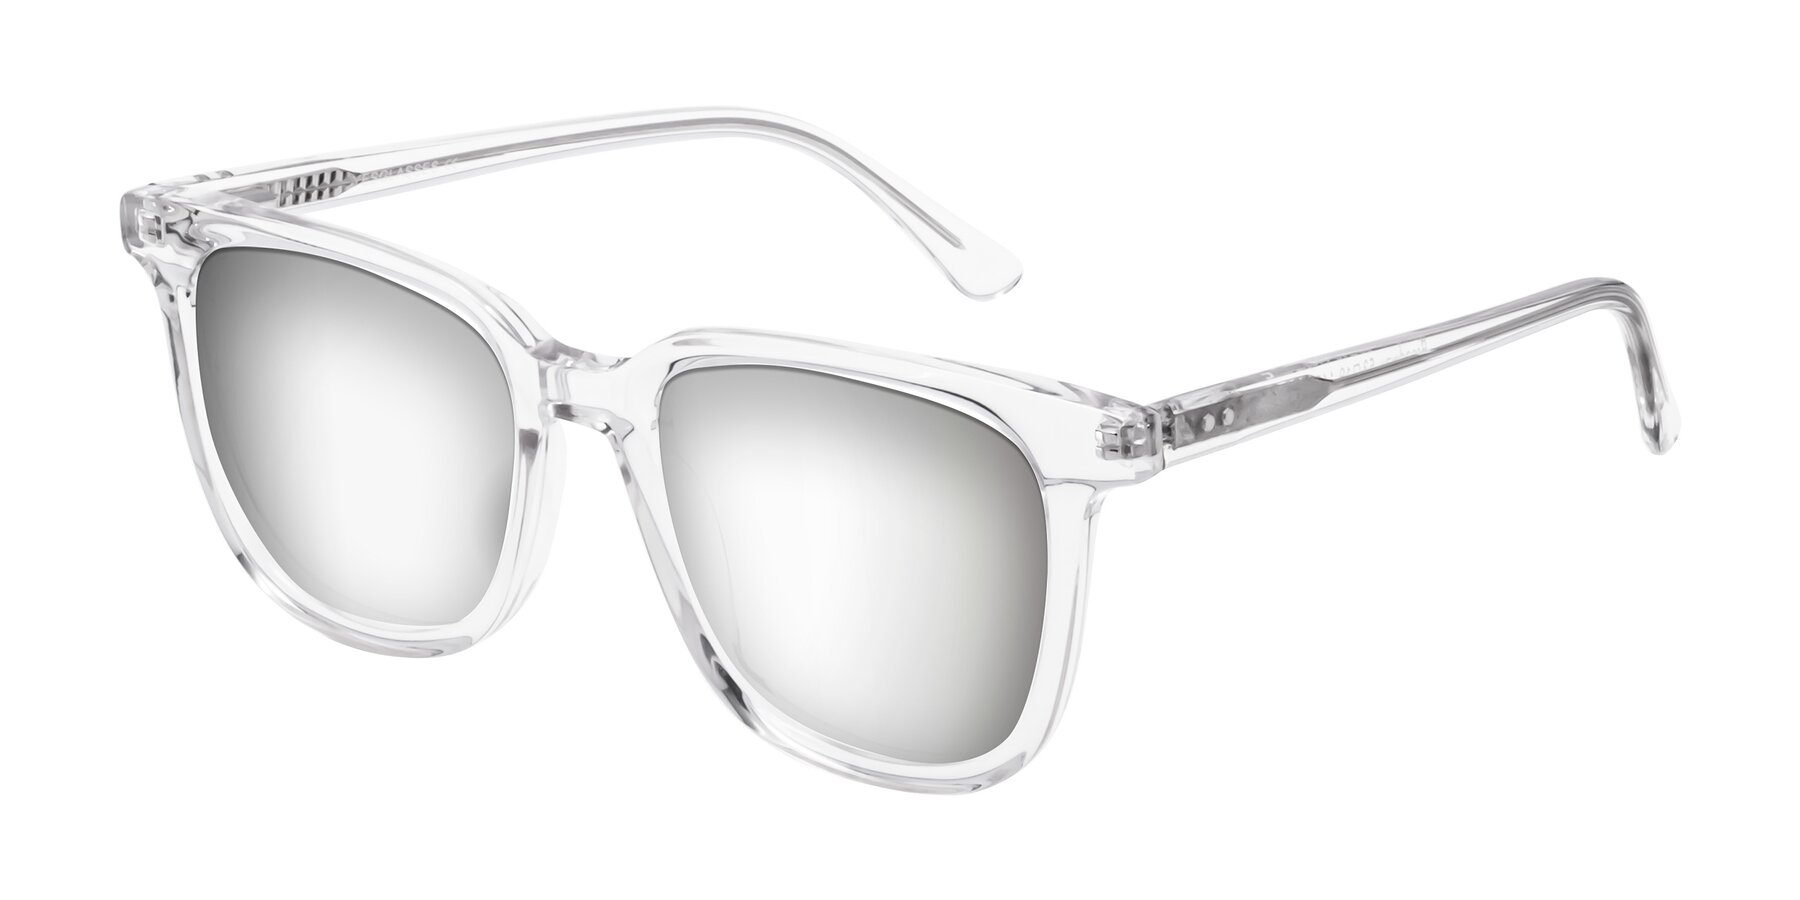 Clear Sunglasses Trapezoid Lenses Broadway - Sunwear Mirrored Oversized with Acetate Silver